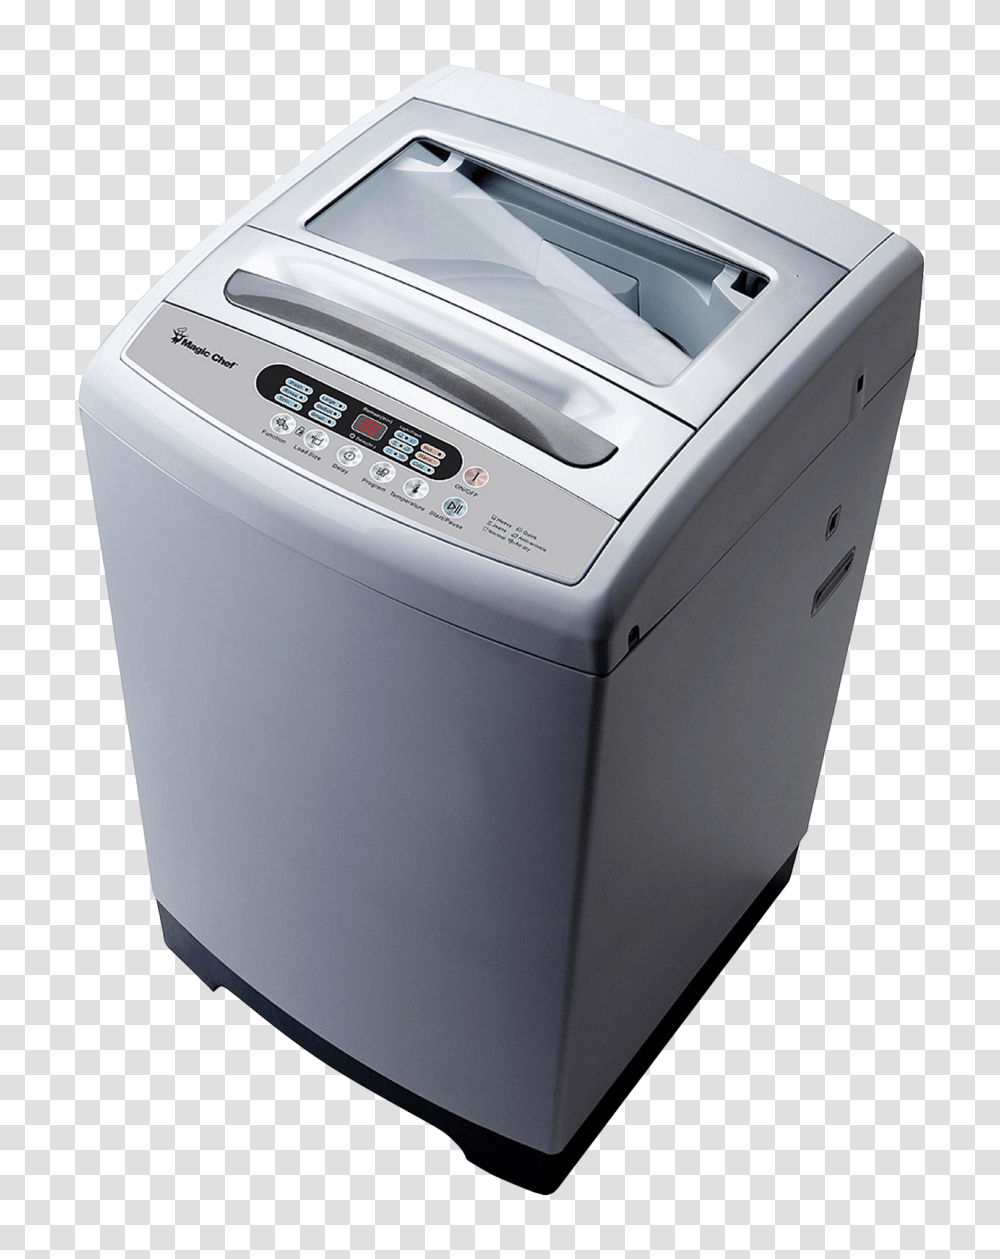 Washing Machine Top View Image, Electronics, Mailbox, Letterbox, Appliance Transparent Png